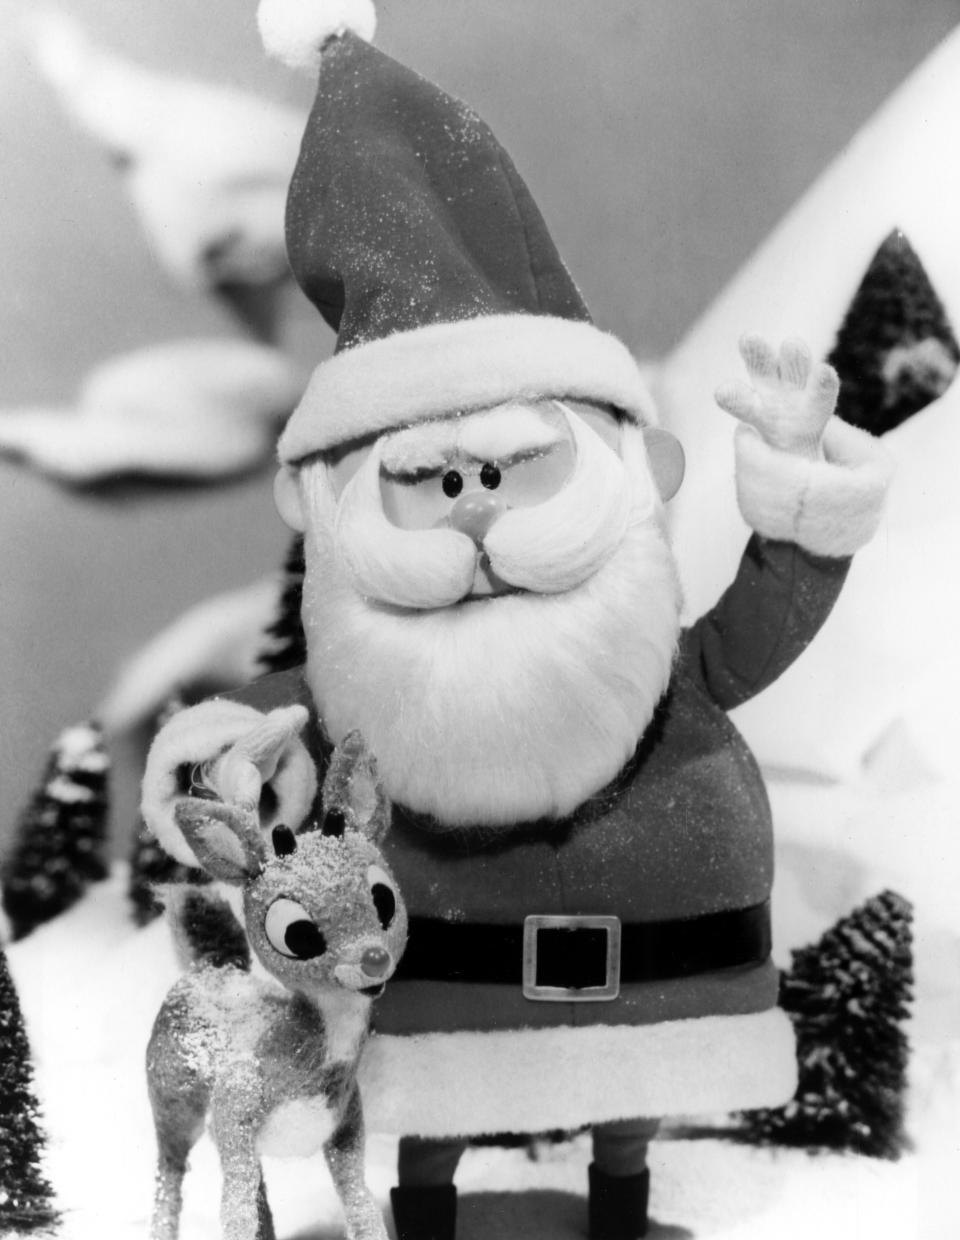 <h1 class="title">RUDOLPH, THE RED-NOSED REINDEER, (aka RUDOLPH THE RED-NOSED REINDEER), 1964</h1><cite class="credit">Courtesy Everett Collection</cite>